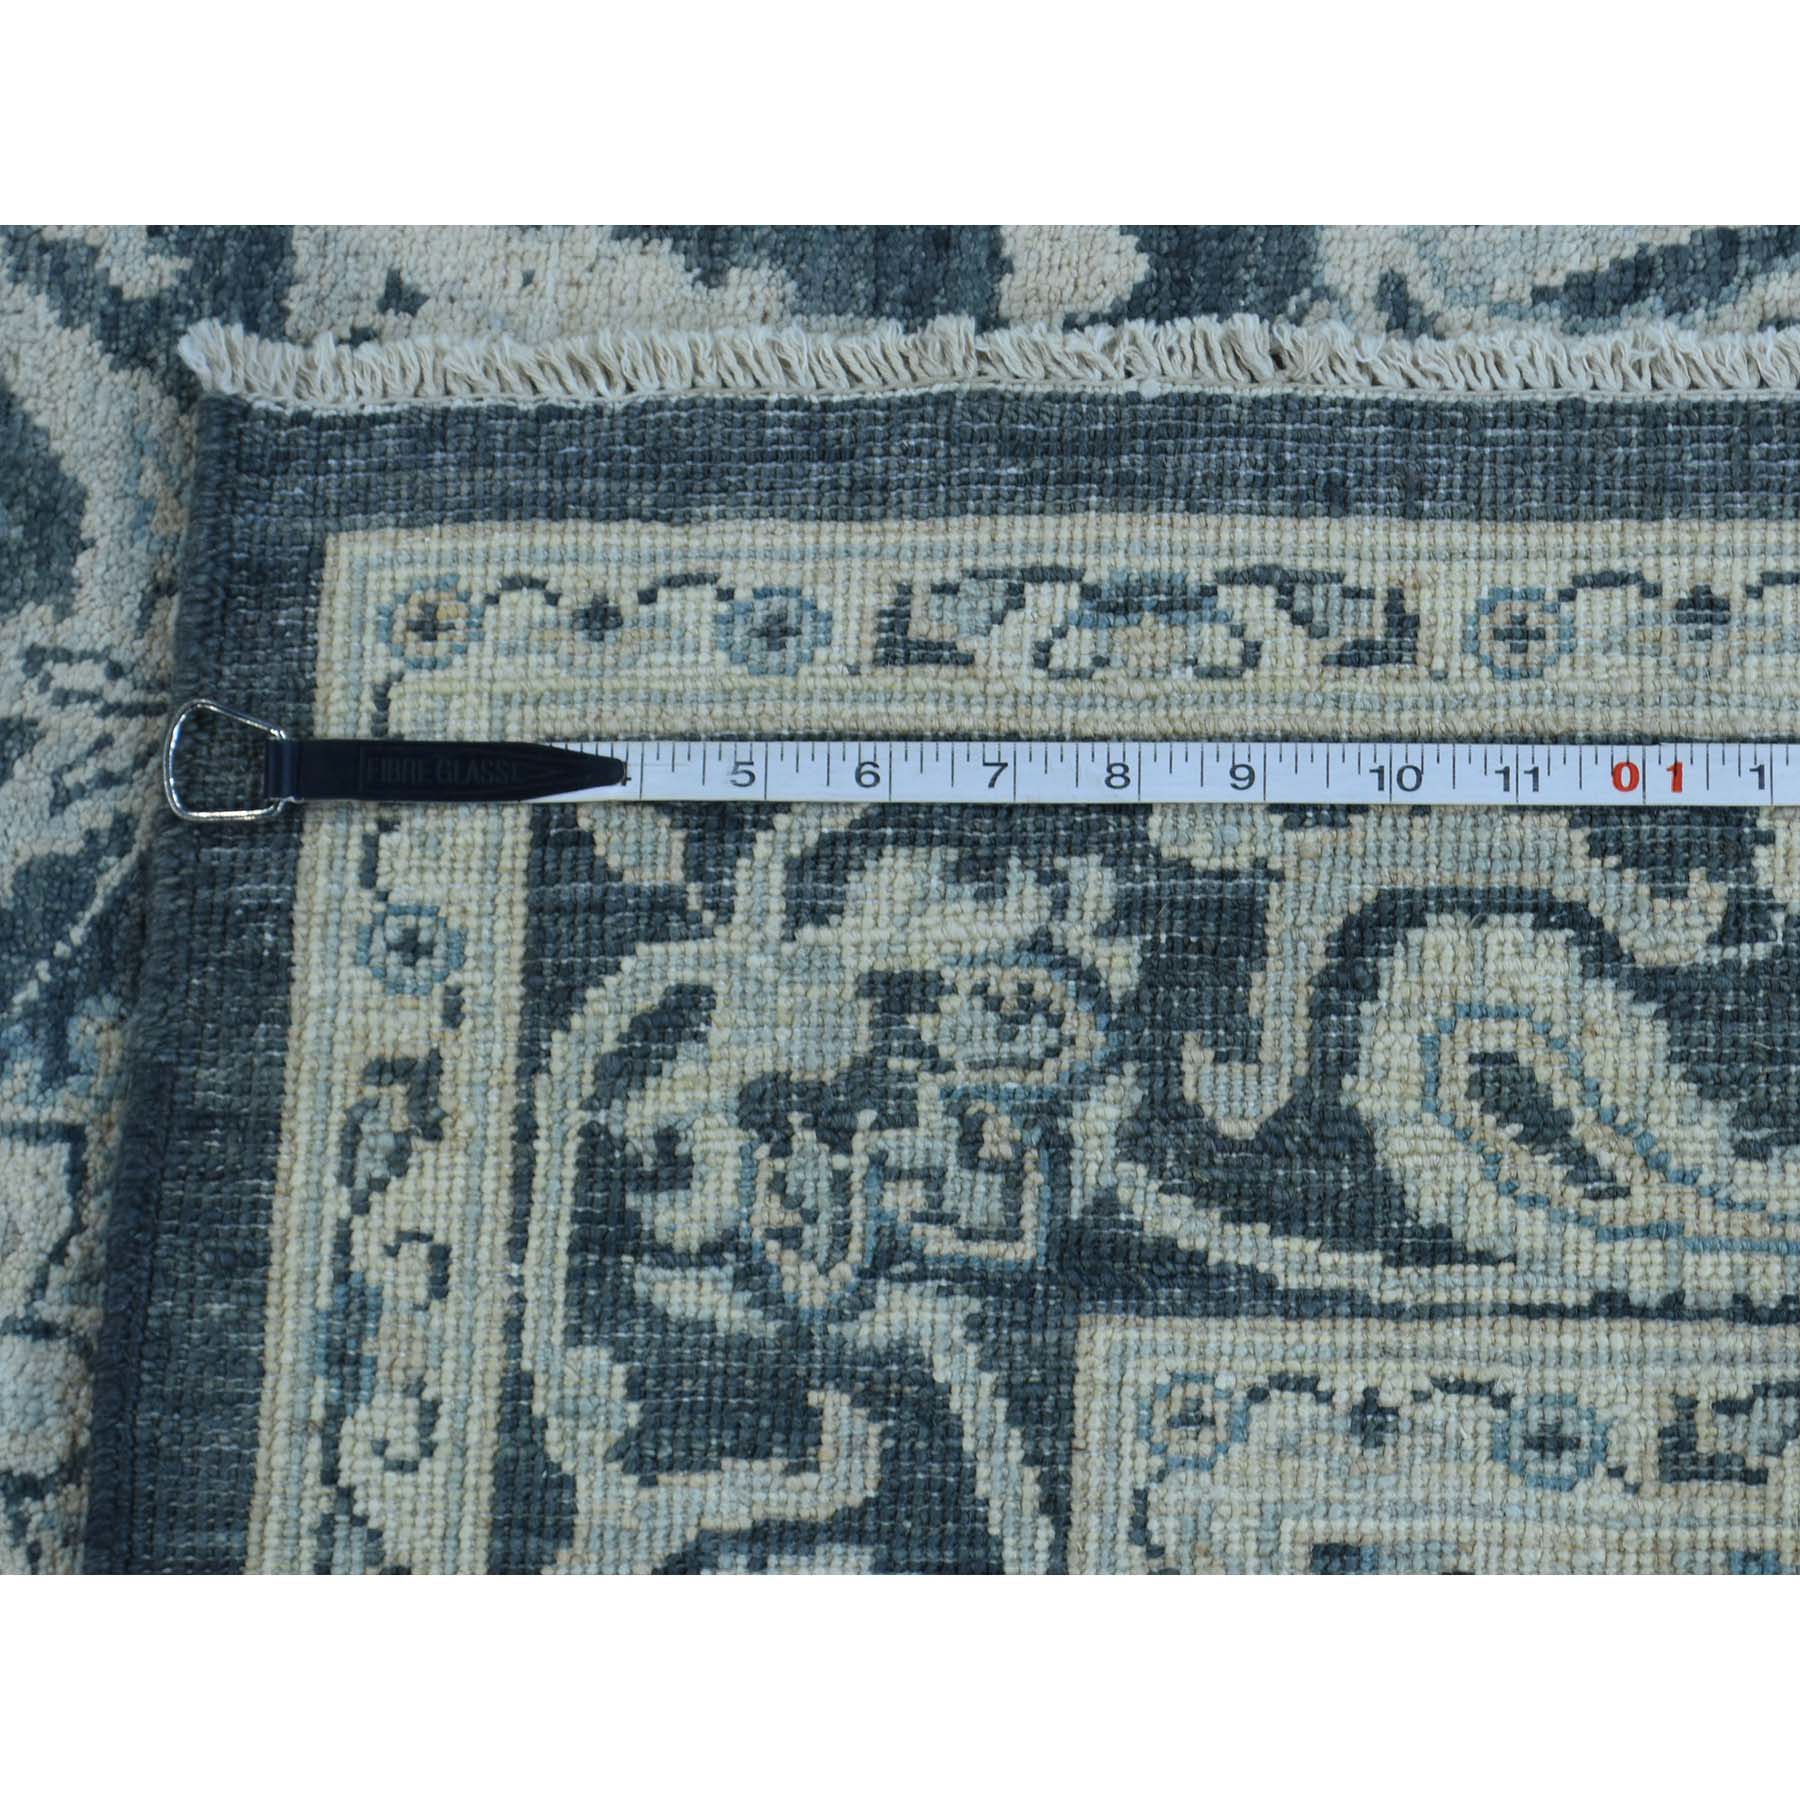 4-x5-10  Tone on Tone Hand-Knotted Pure Wool Peshawar Oriental Rug 